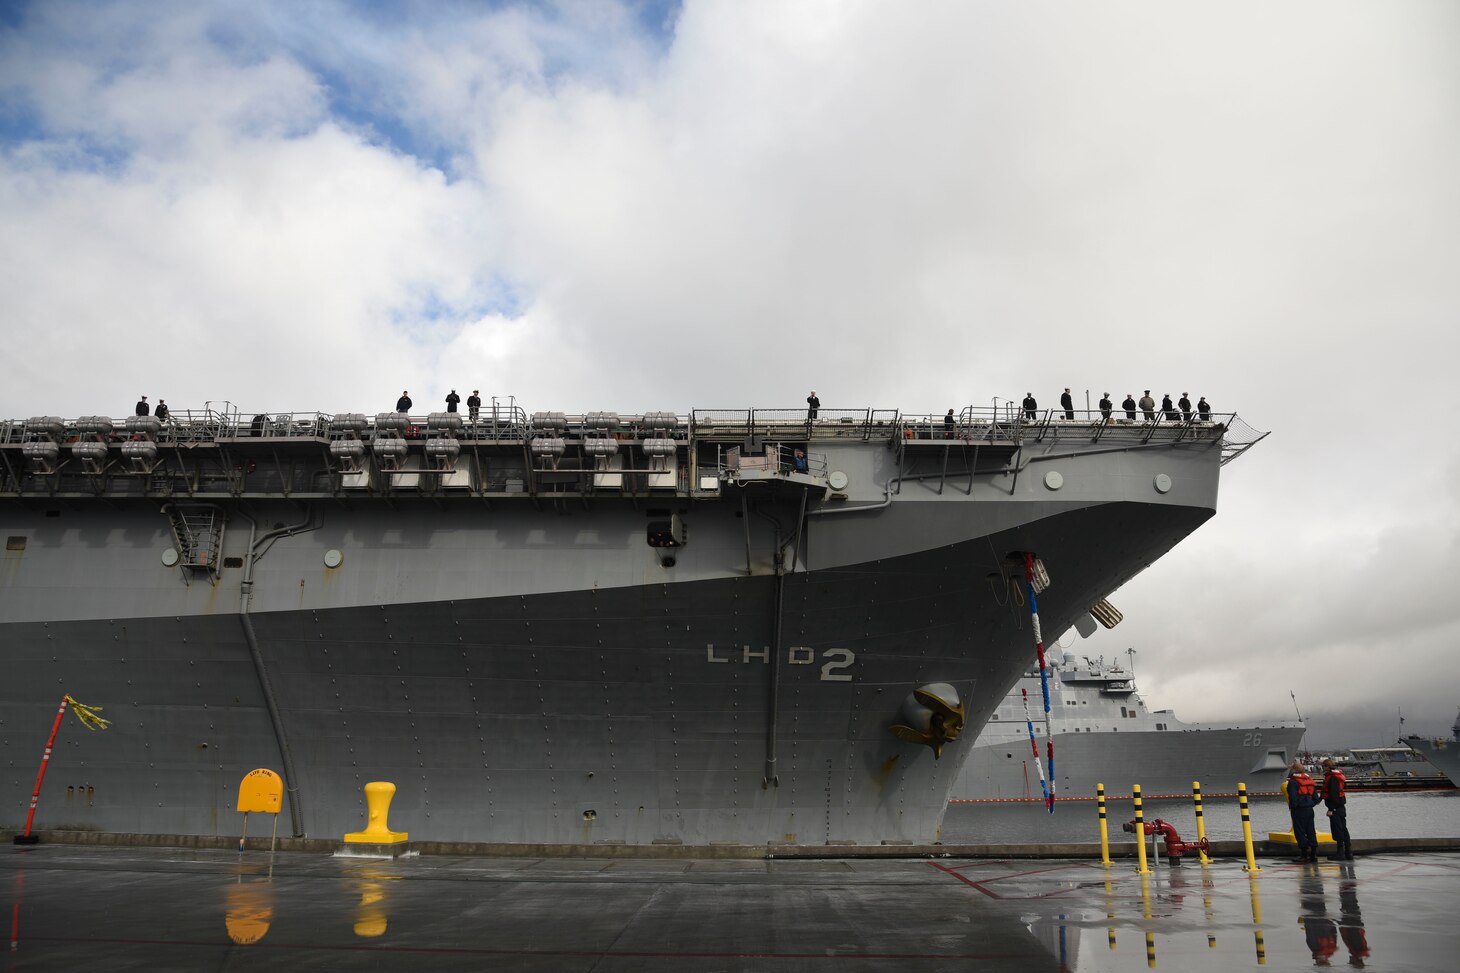 Amphibious assault ship USS Essex (LHD 2) arrives pierside at Naval Base San Diego. Essex, a part of the Essex Amphibious Ready Group, returned to Naval Base San Diego, March 4, after a deployment to U.S. 3rd, 5th, and 7th in support of regional stability and a free and open Info-Pacific.